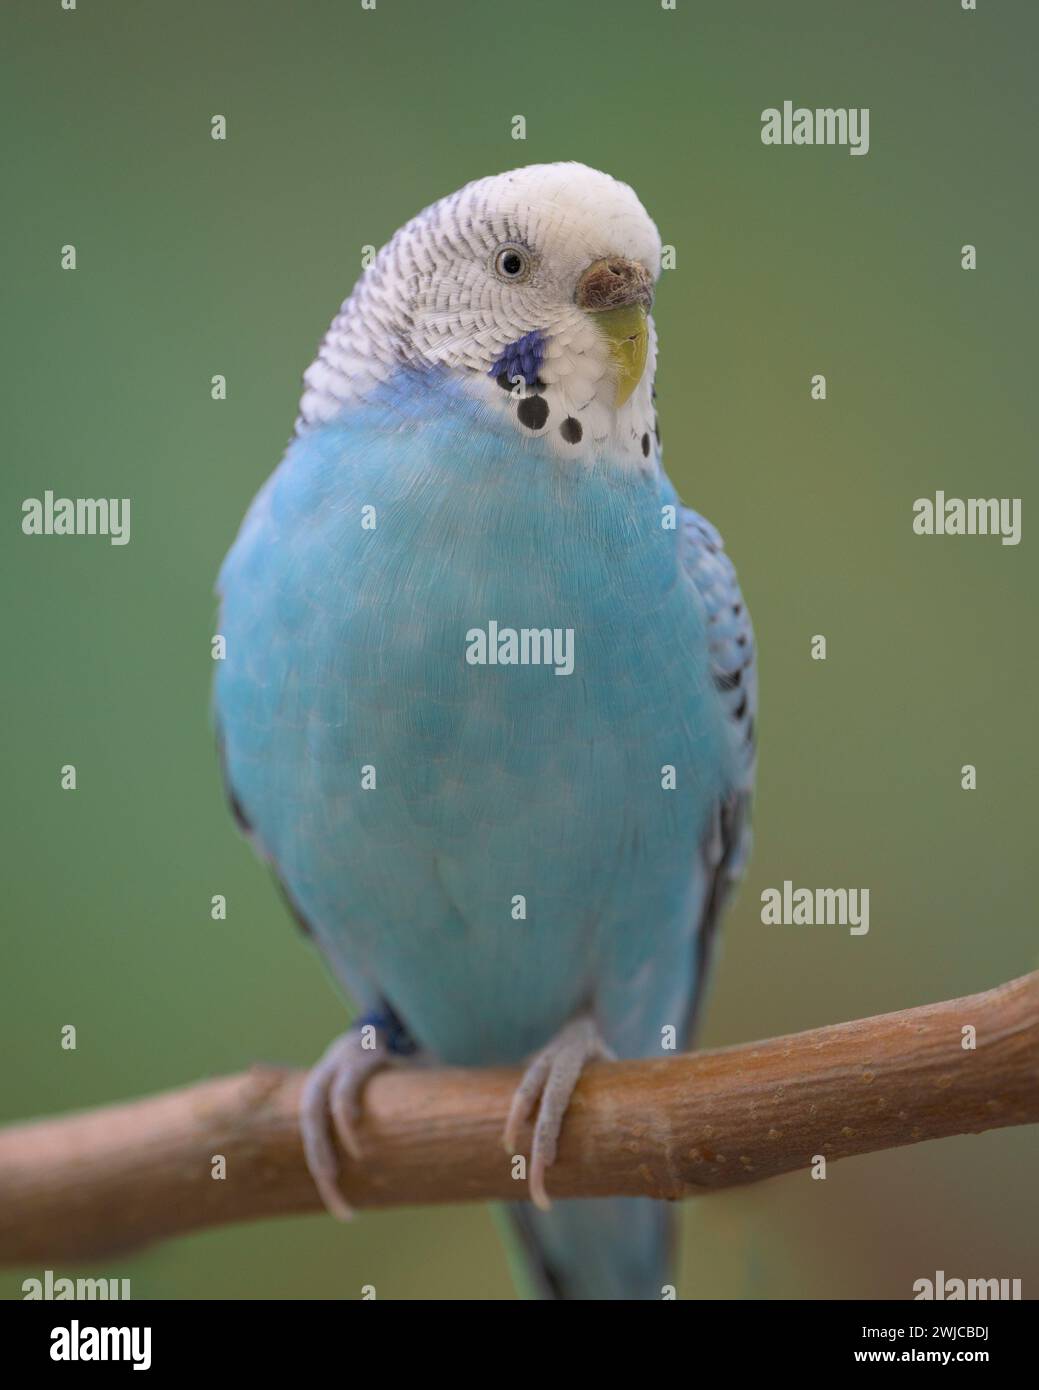 Colorful blue parakeet (Melopsittacus undulatus) perched on tree branch Stock Photo